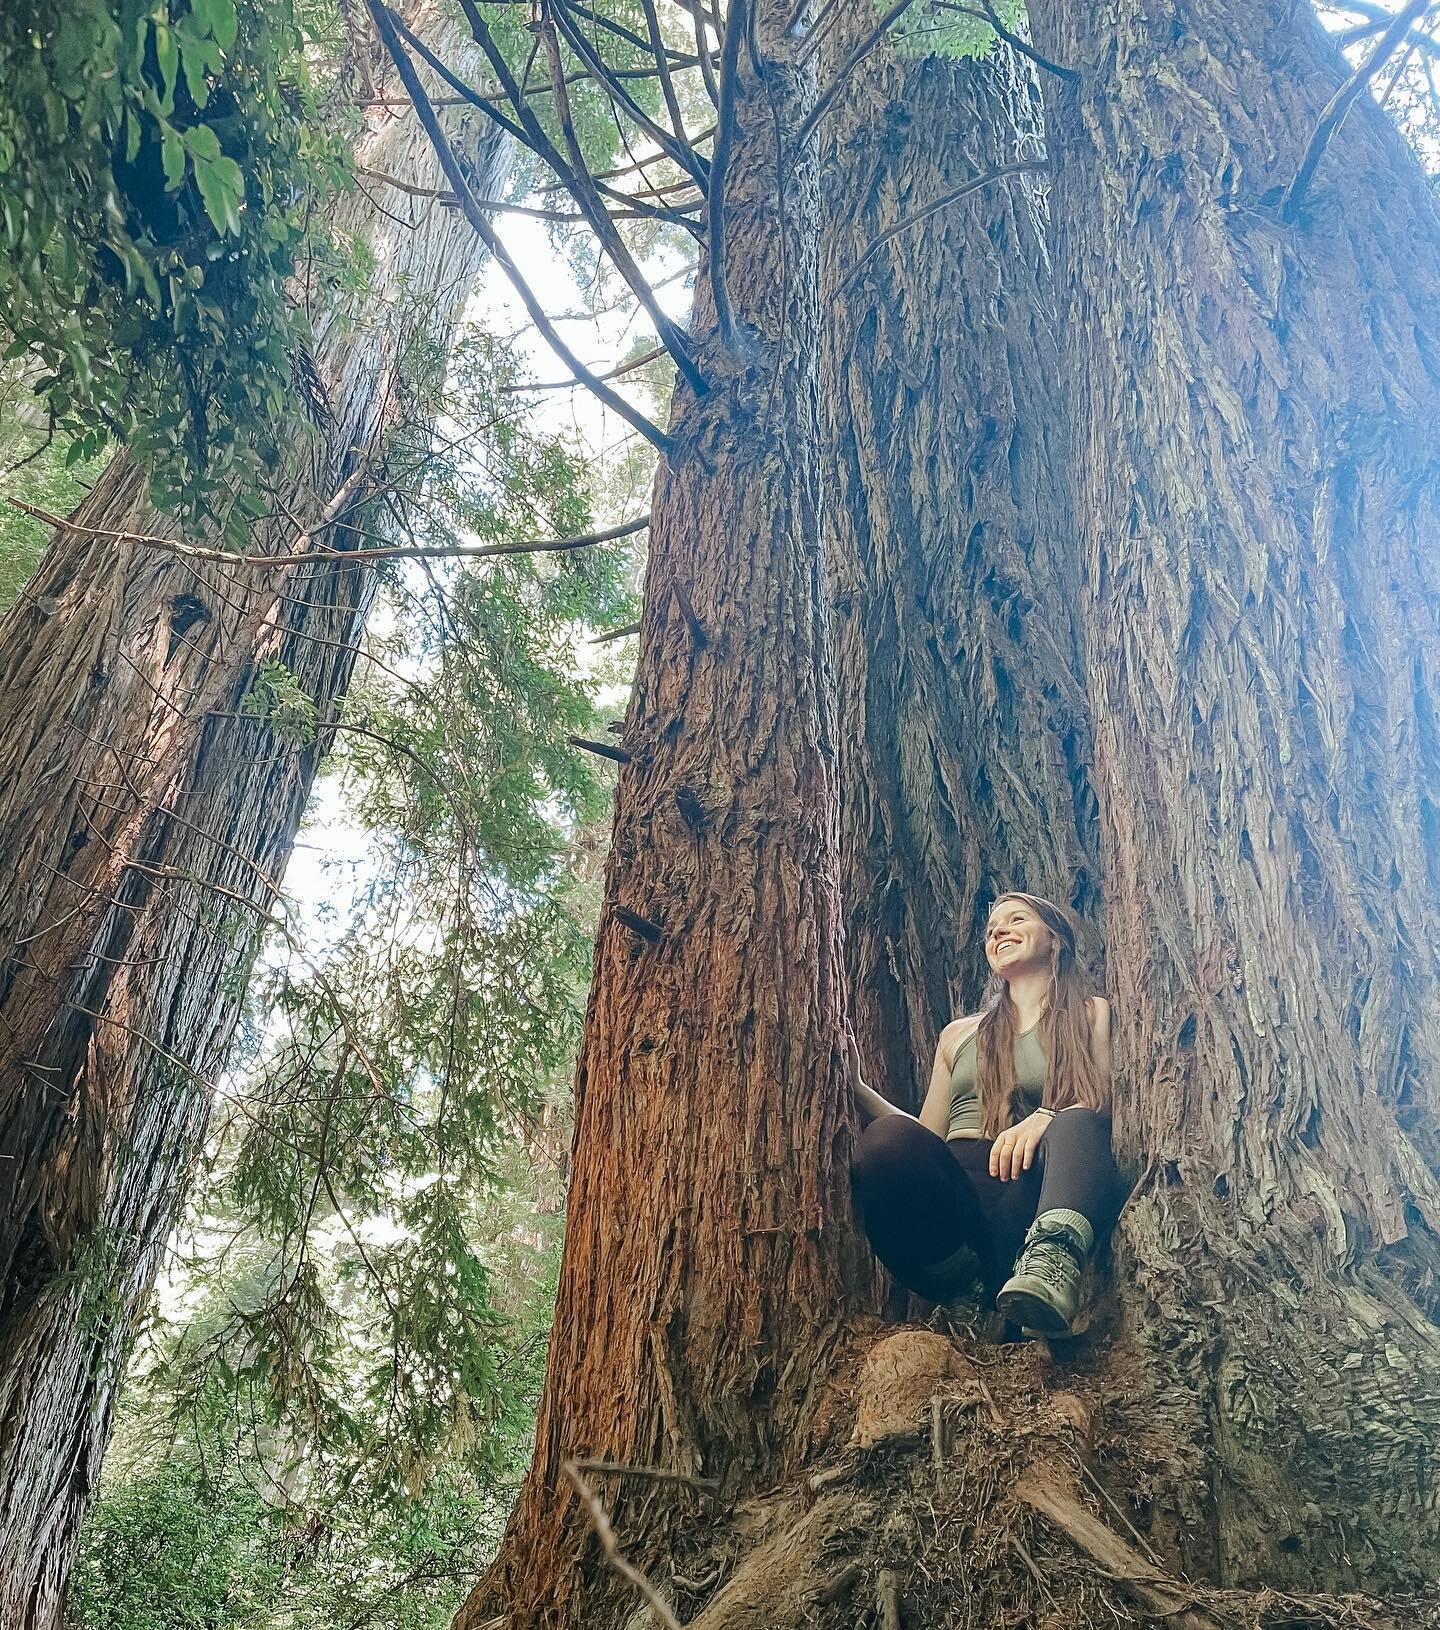 Happy Earth Day! We&rsquo;re surrounded by magic. The rain, the trees, the mountains, the seas. Everything living and breathing together, connected!
🌎✨
Take some time to go outside today. Touch (or hug) a tree, feel the grass beneath your feet, feel